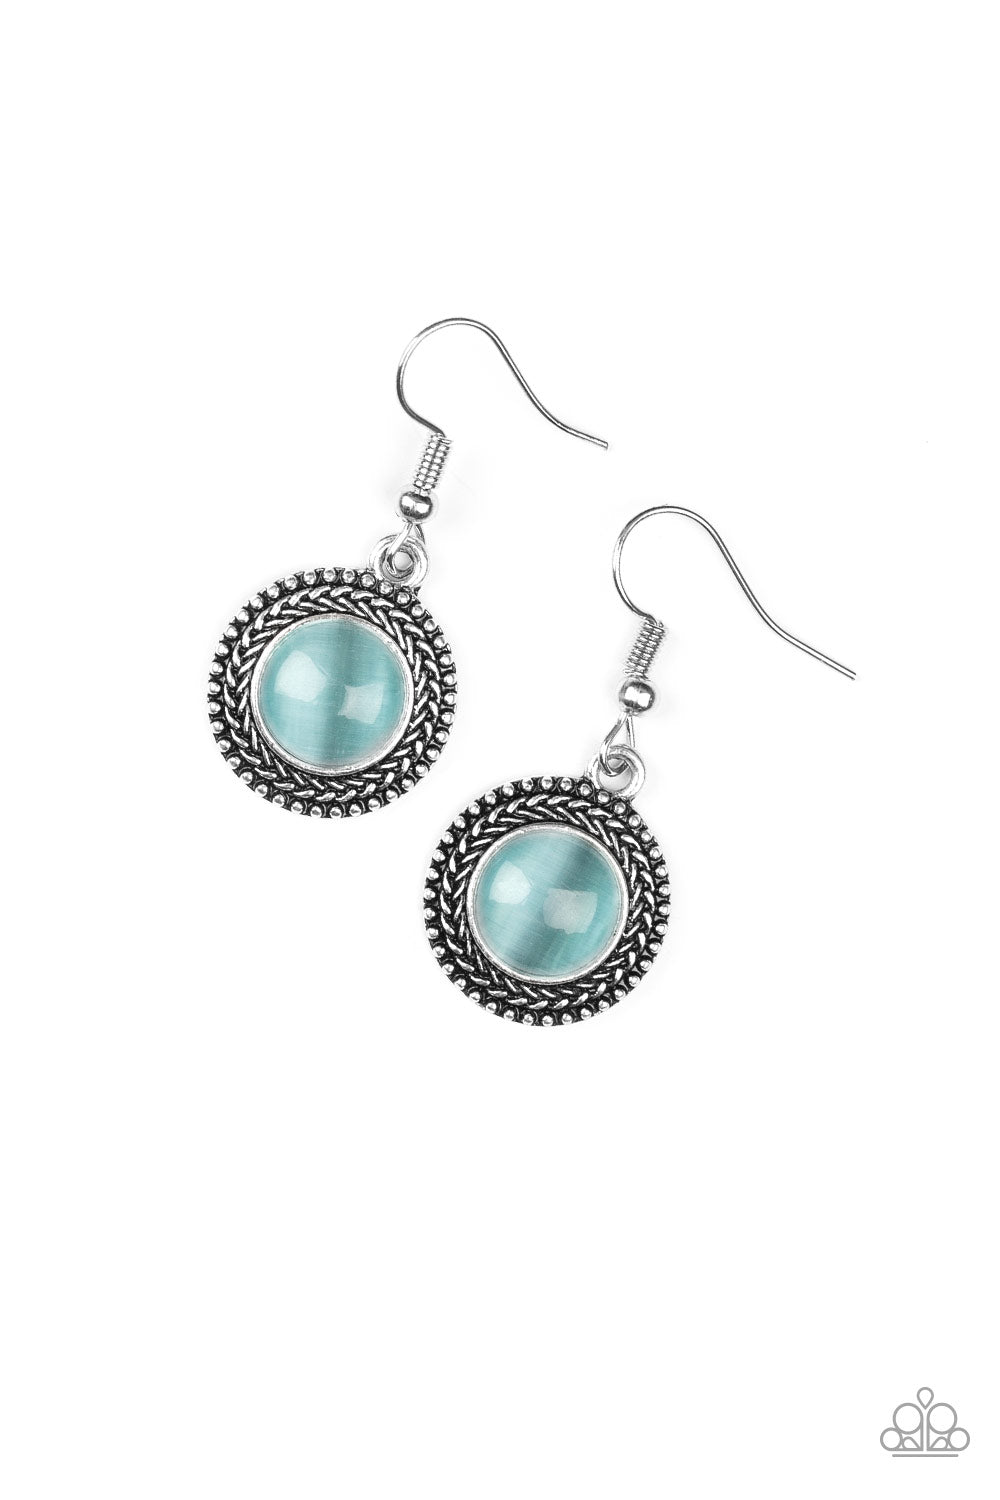 TIME TO GLOW UP! - BLUE MOONSTONE DAINTY PENDANT EARRINGS